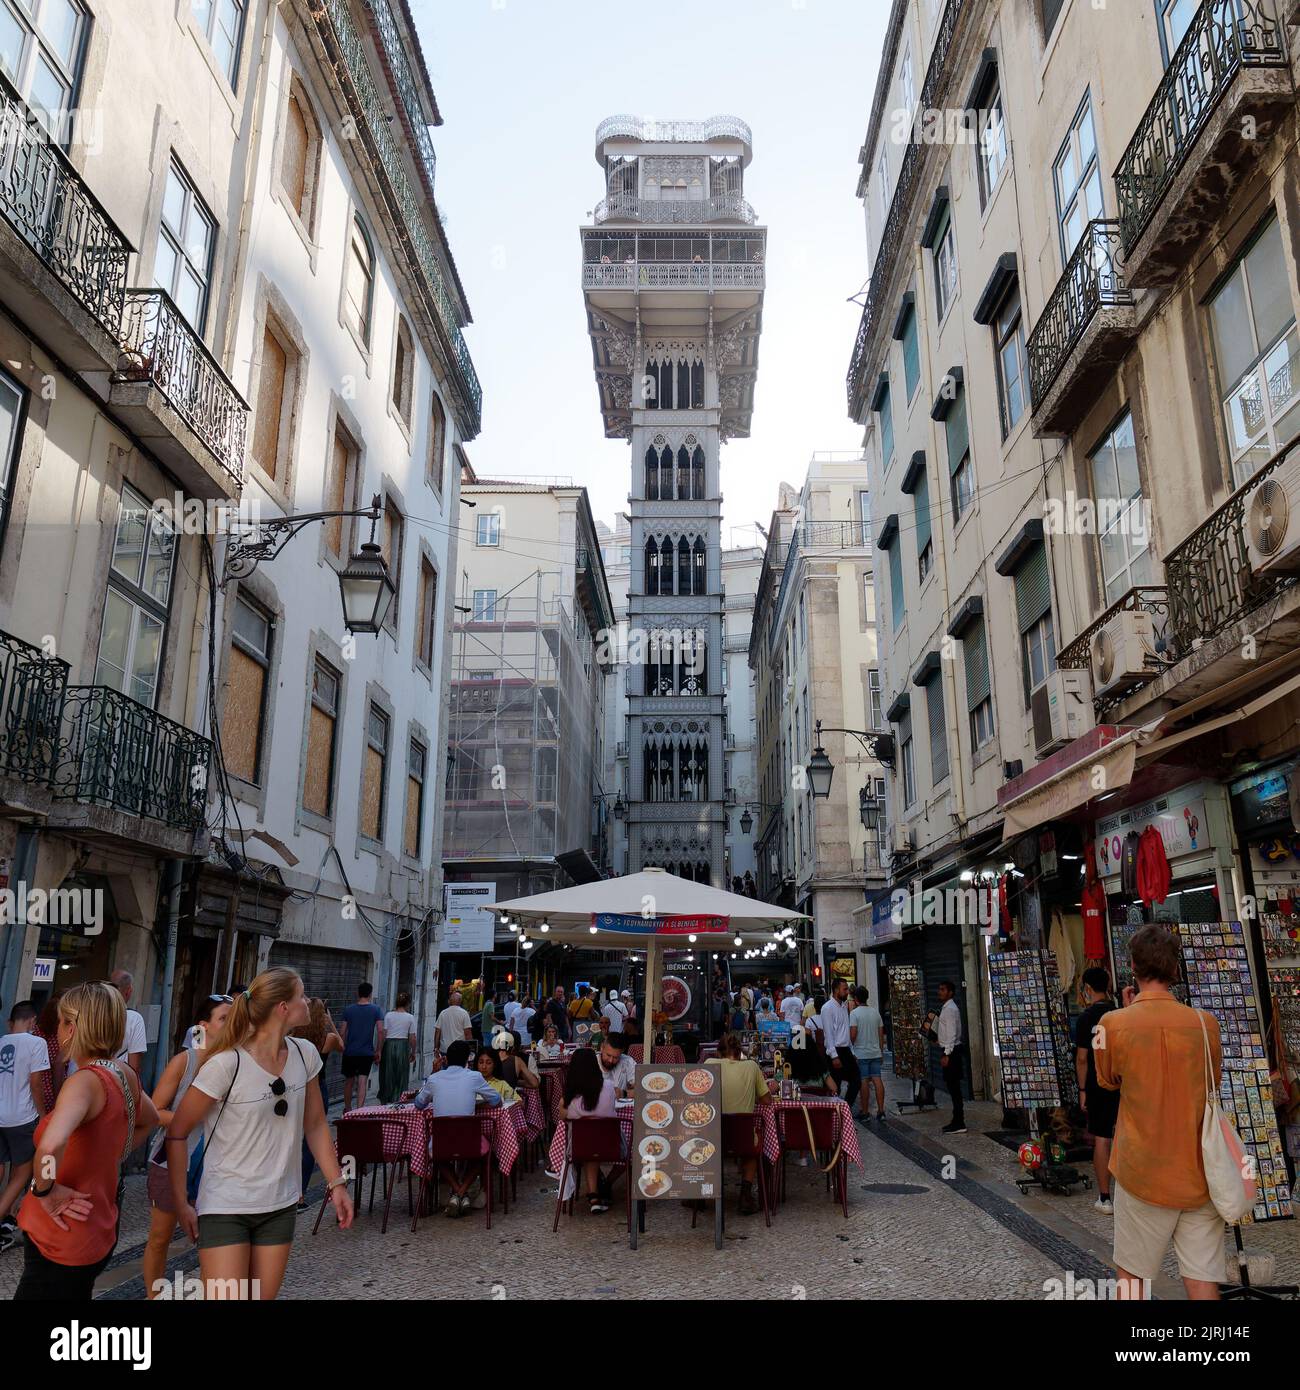 Santa Justa Lift in Lisbon, Portugal. Tourists walk the streets below and eat in the restaurants. Stock Photo